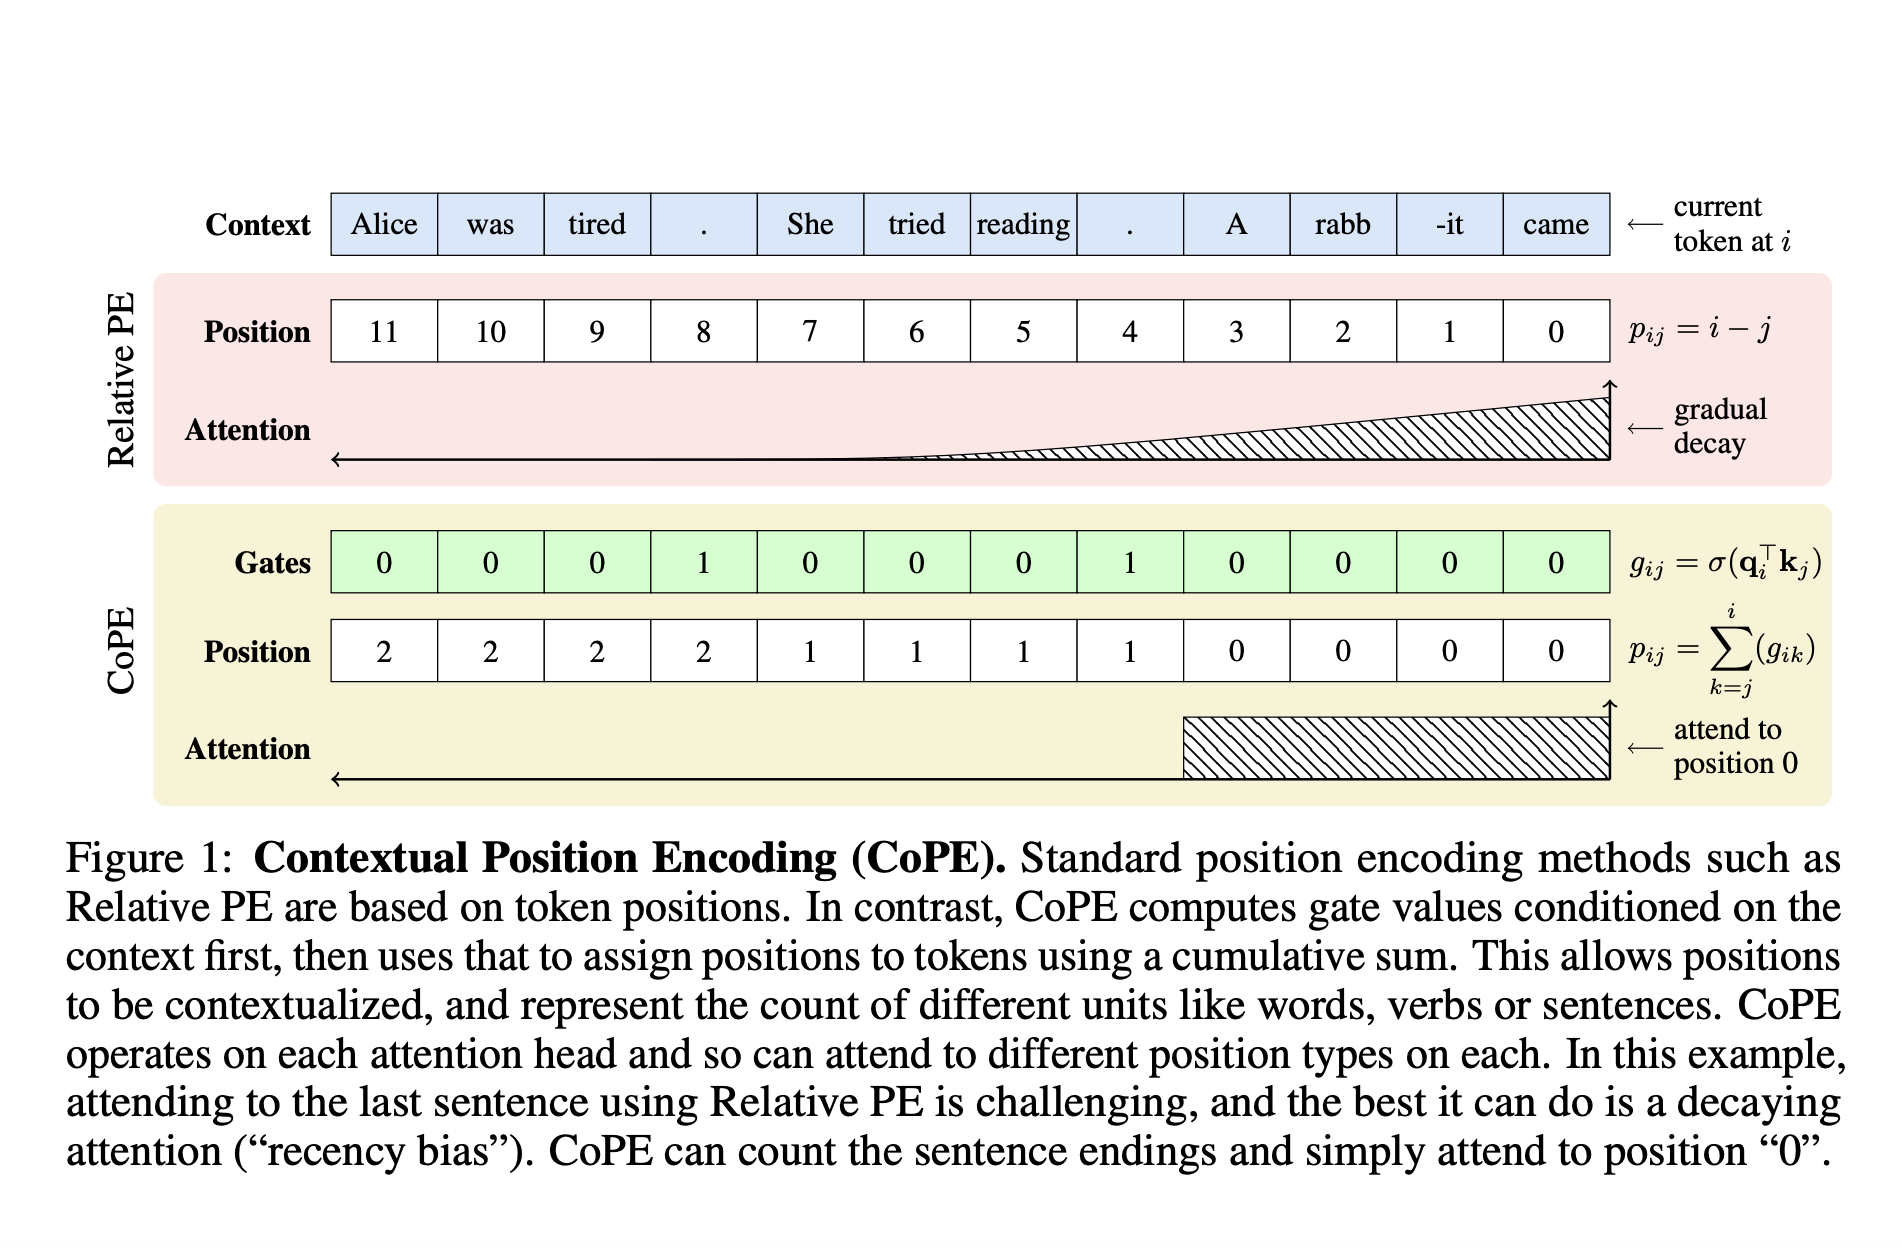  Contextual Position Encoding (CoPE): A New Position Encoding Method that Allows Positions to be Conditioned on Context by Incrementing Position only on Certain Tokens Determined by the Model